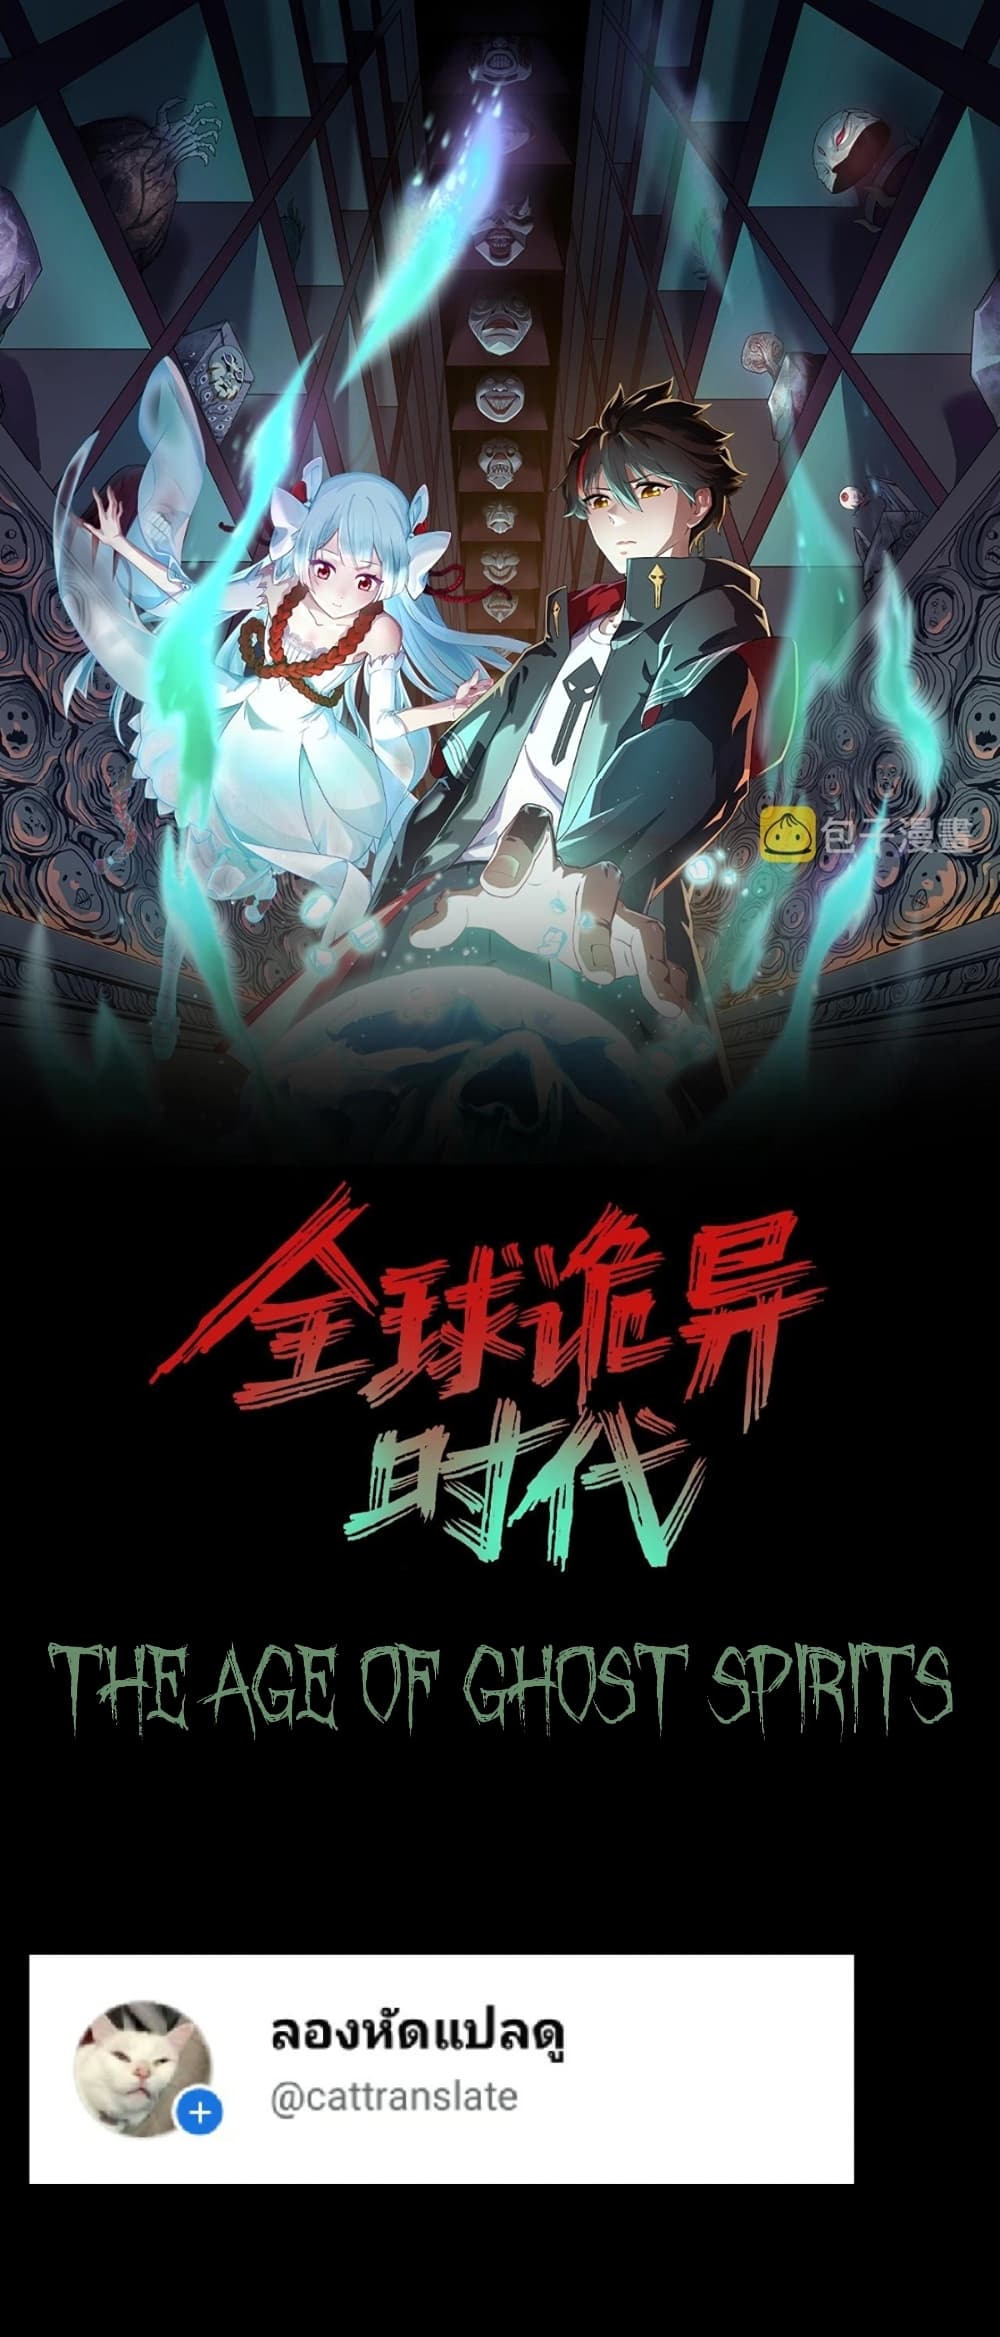 The Age of Ghost Spirits à¸à¸­à¸à¸à¸µà¹ 4 (1)